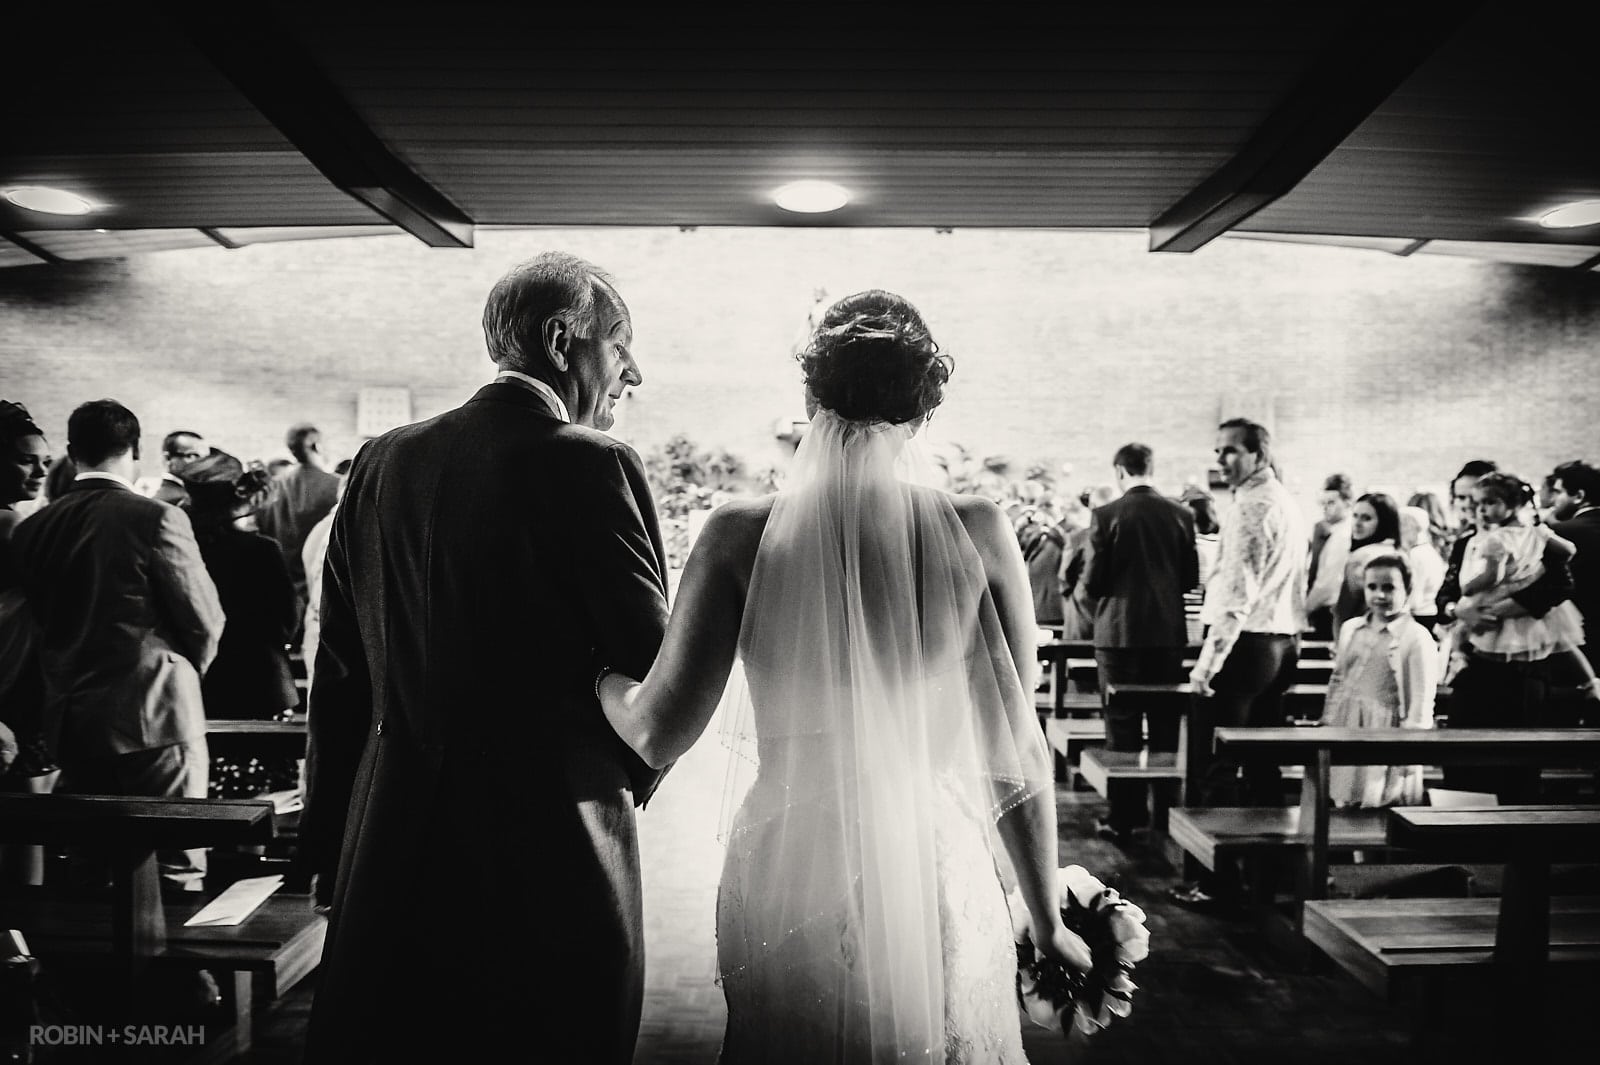 Dad glances at daughter as they walk up aisle for wedding ceremony